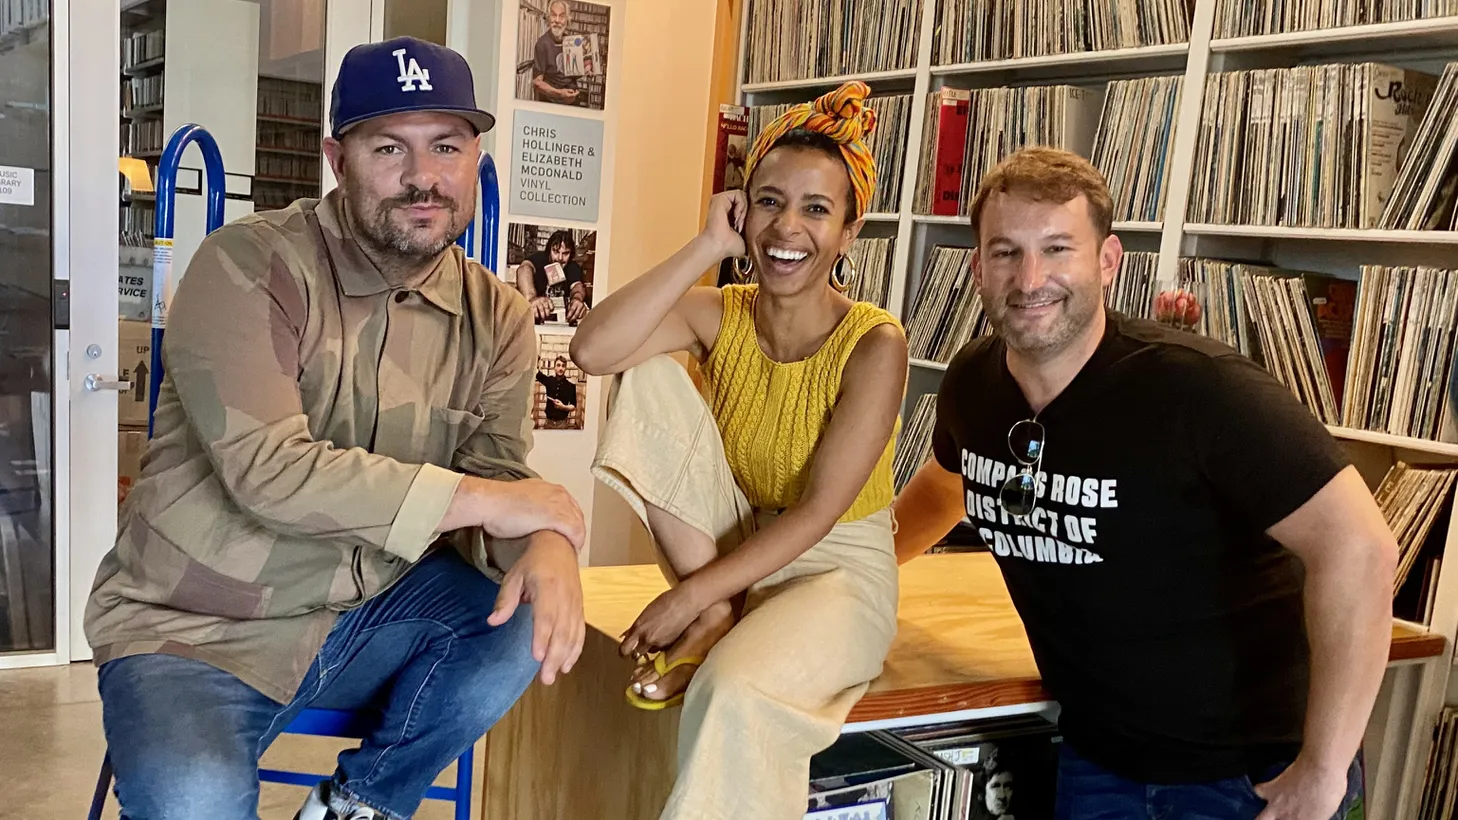 Award-winning journalist David Greene is officially part of the KCRW family as the new host of Left, Right & Center. Naturally, we had to put him in the MBE hot seat.